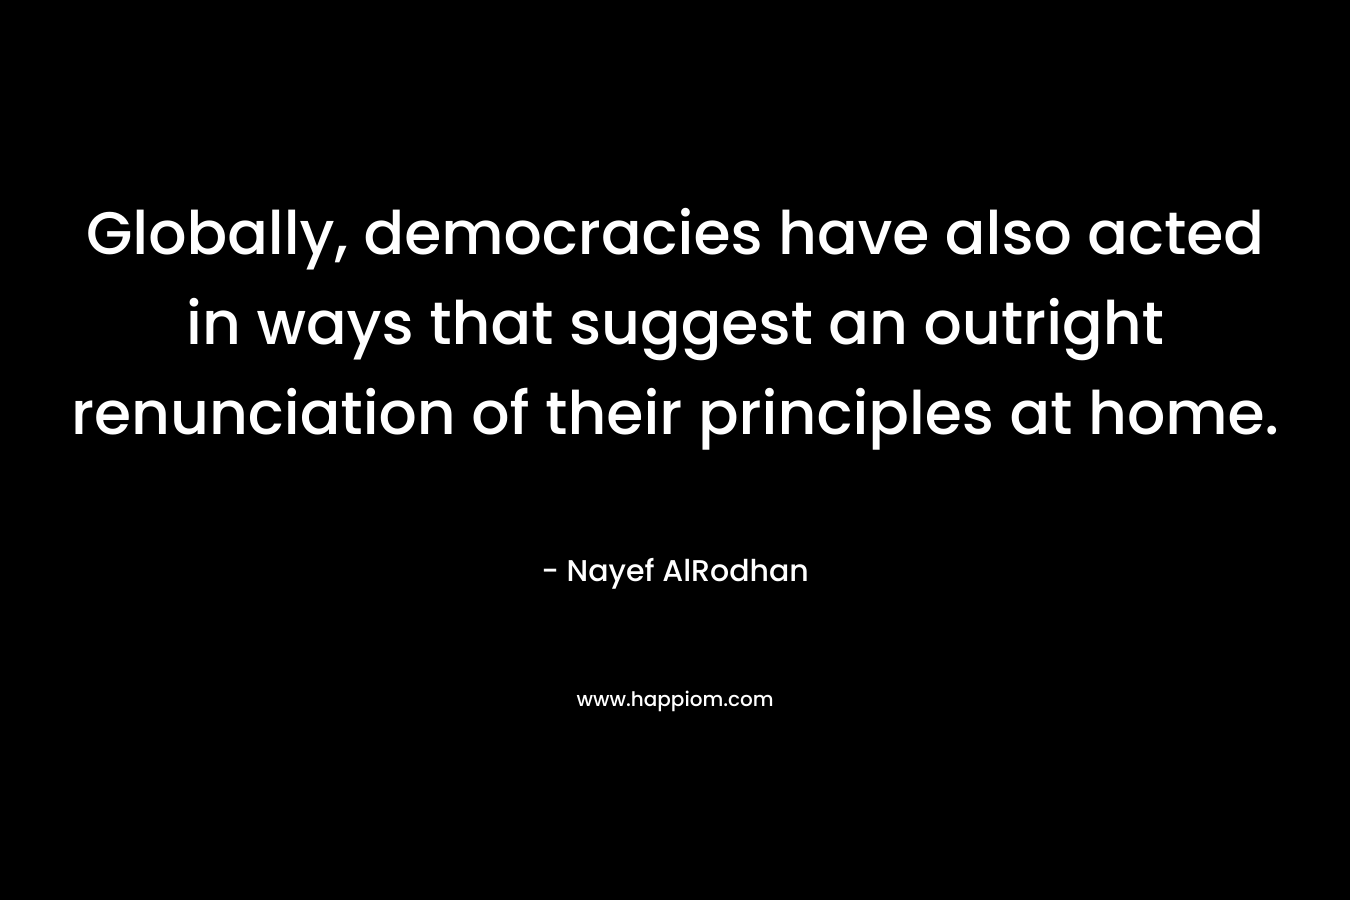 Globally, democracies have also acted in ways that suggest an outright renunciation of their principles at home. – Nayef AlRodhan